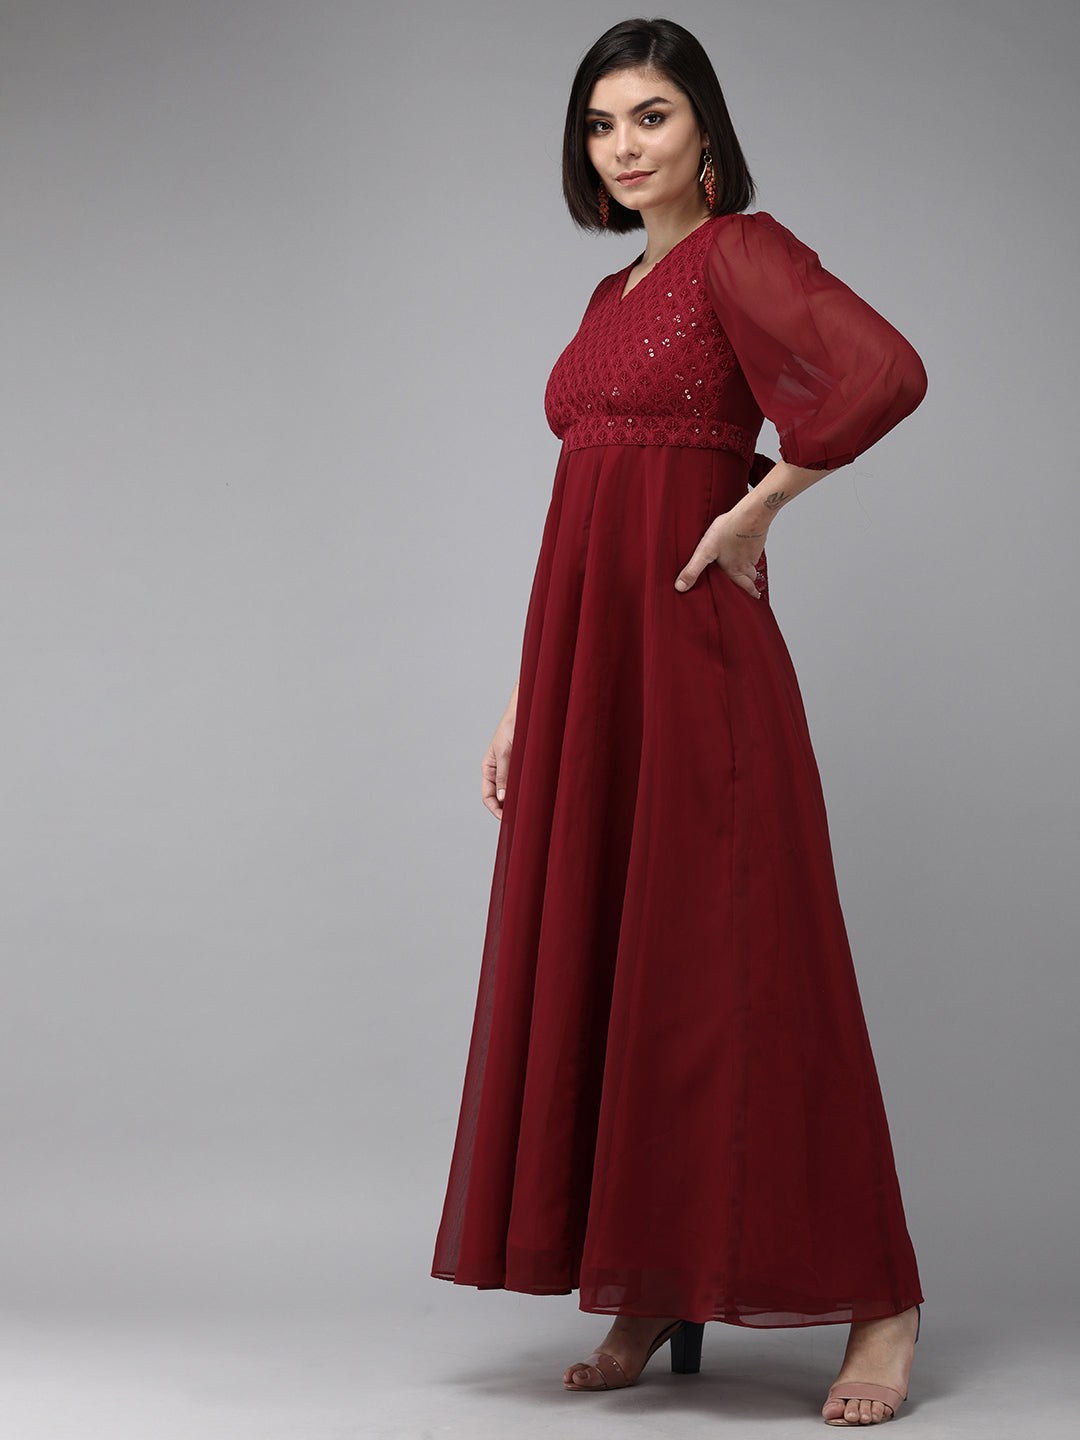 Bhama Couture Maroon Geogette Sequence Embellished Maxi Dress